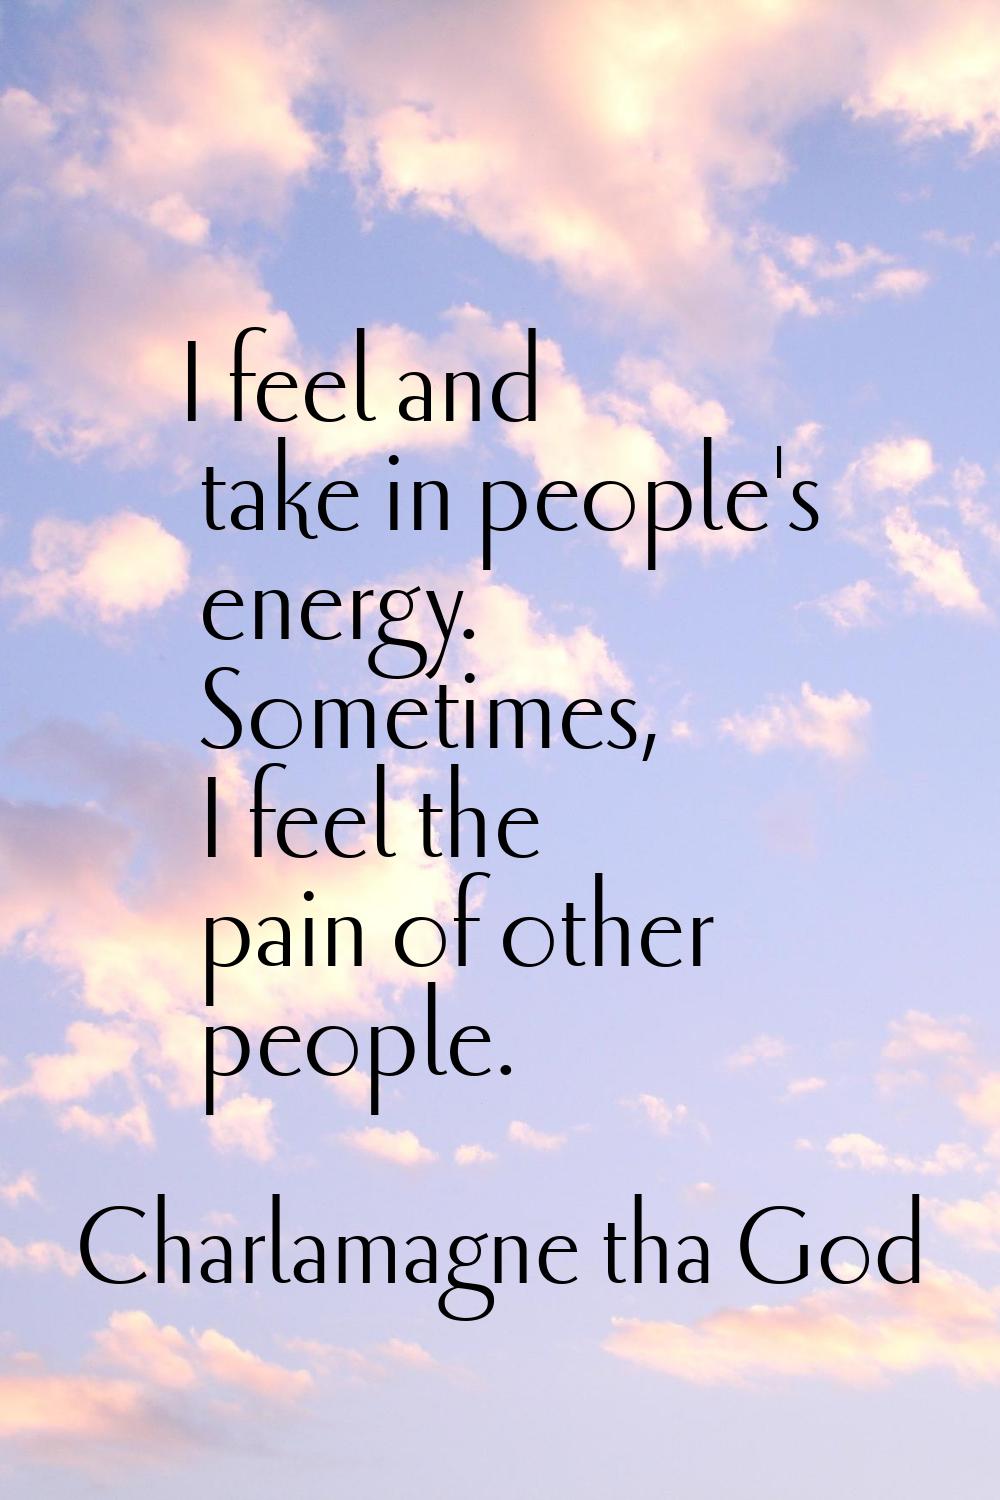 I feel and take in people's energy. Sometimes, I feel the pain of other people.